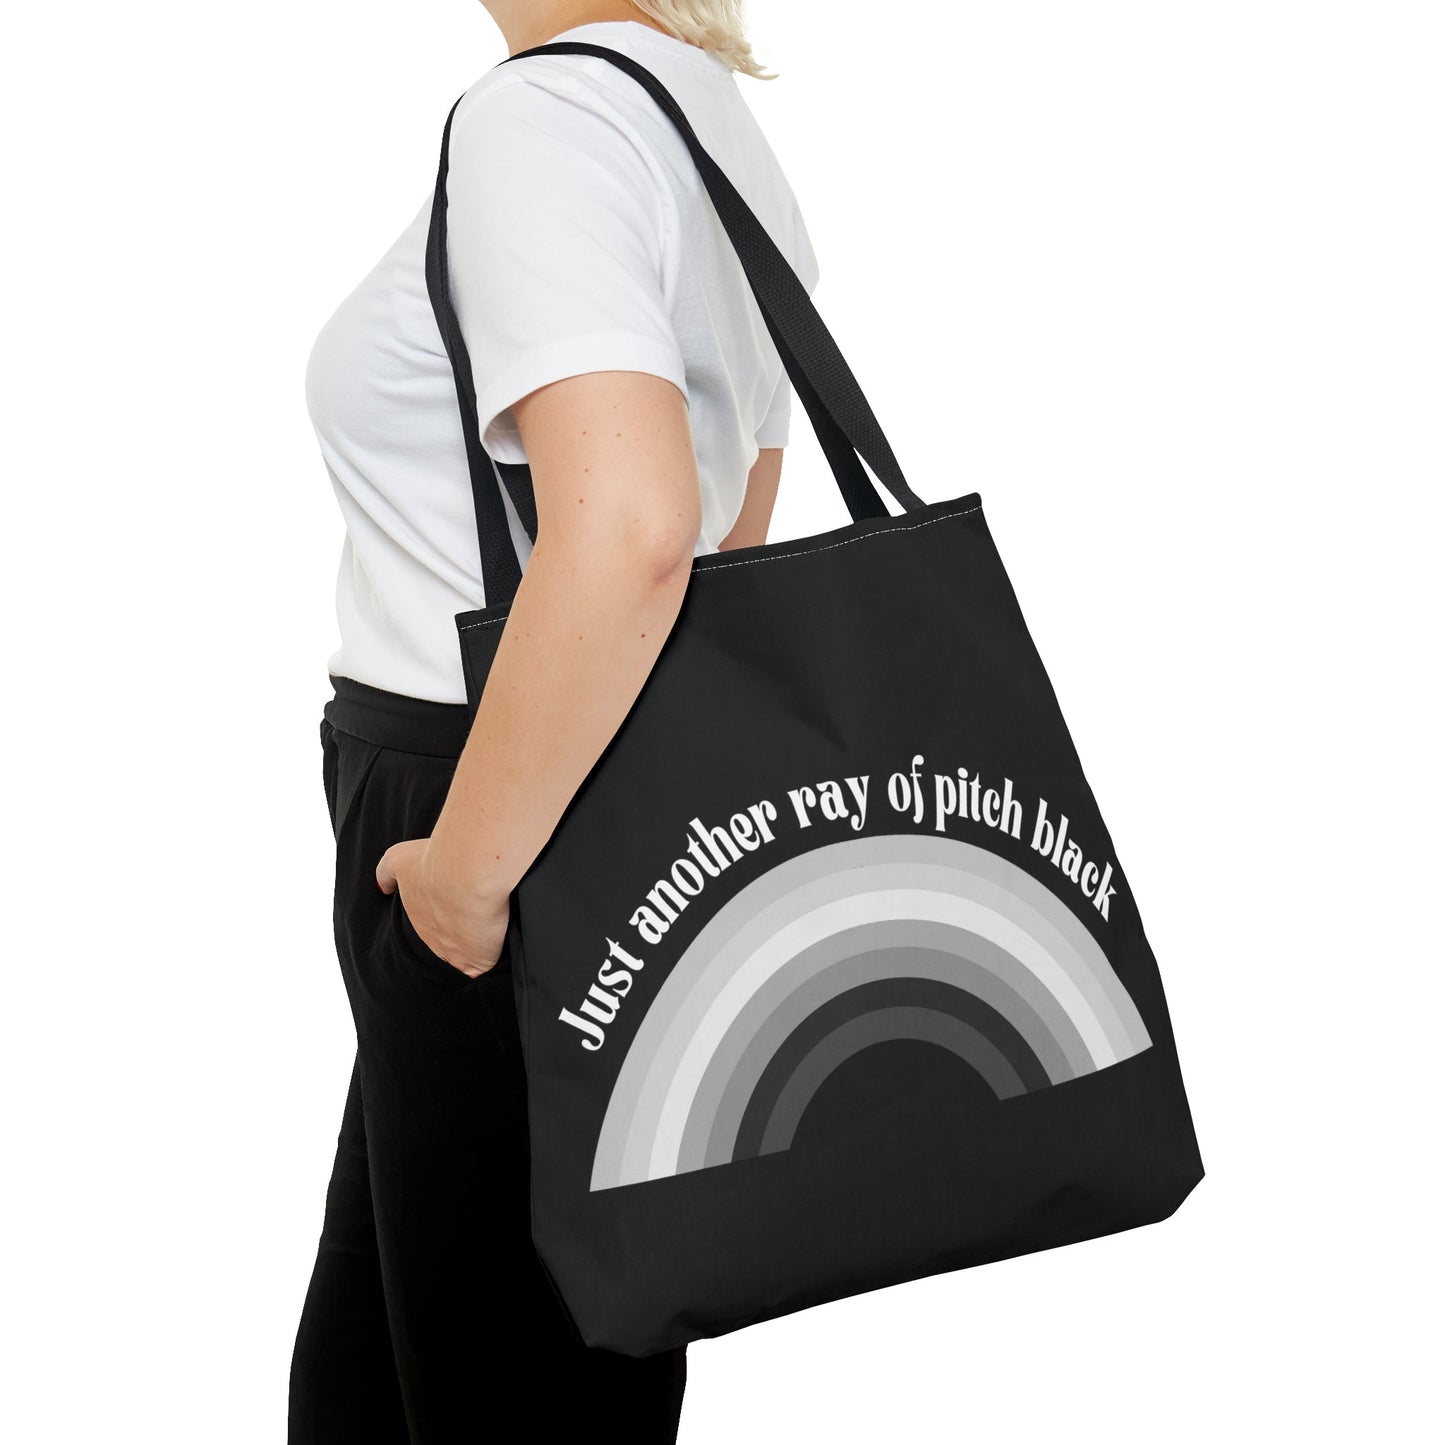 Just Another Ray of Pitch Black Tote Bag in Black | 18" x 18"